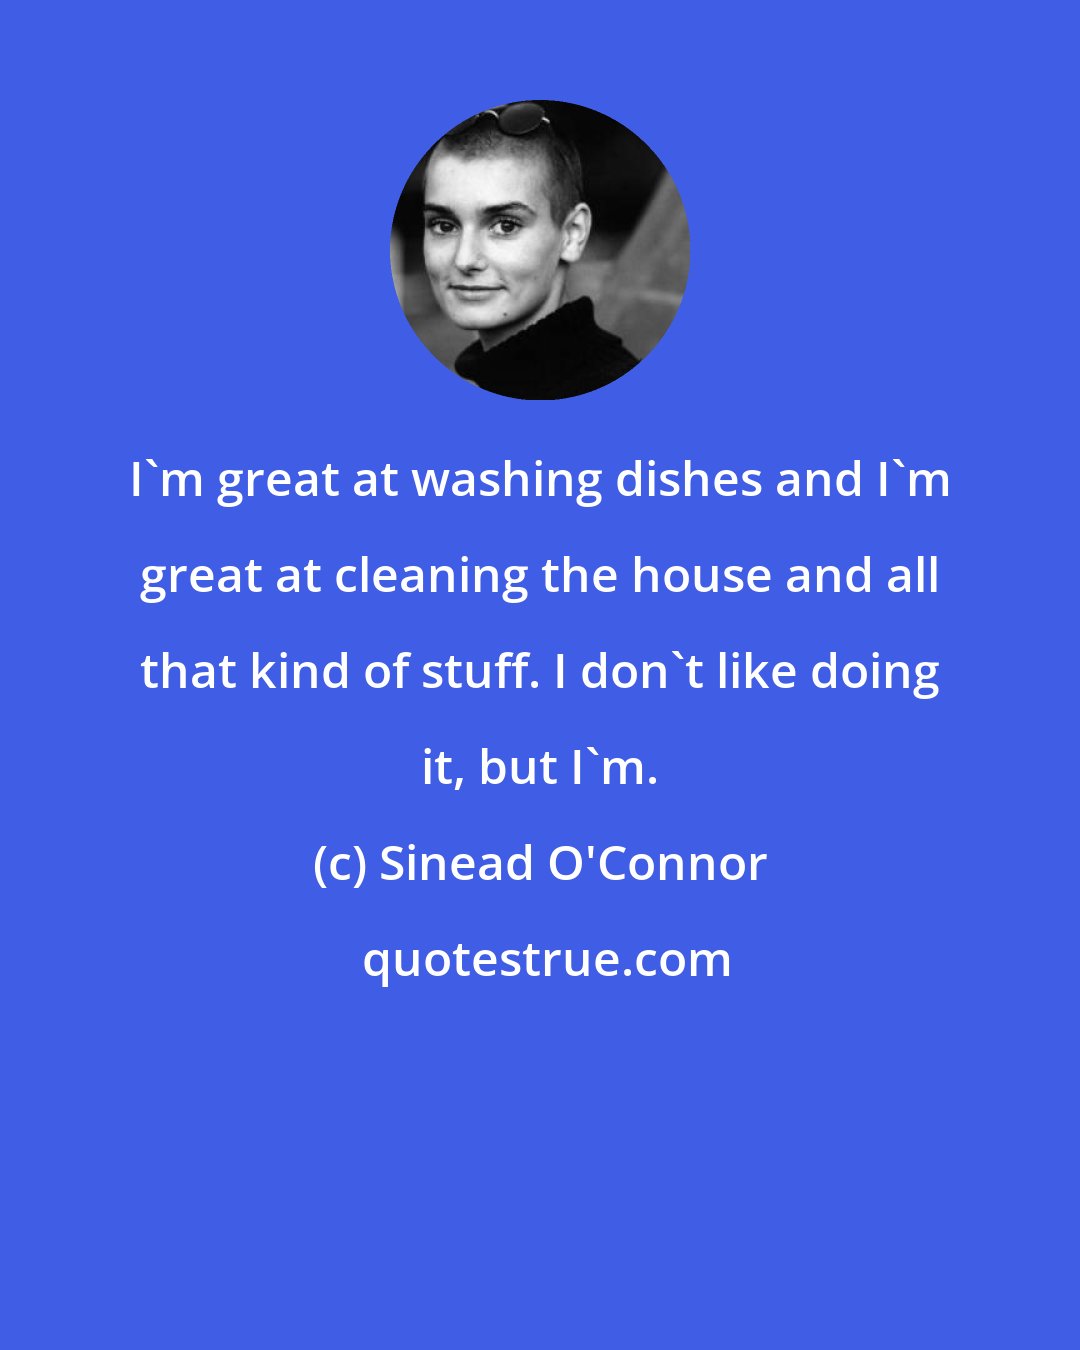 Sinead O'Connor: I'm great at washing dishes and I'm great at cleaning the house and all that kind of stuff. I don't like doing it, but I'm.